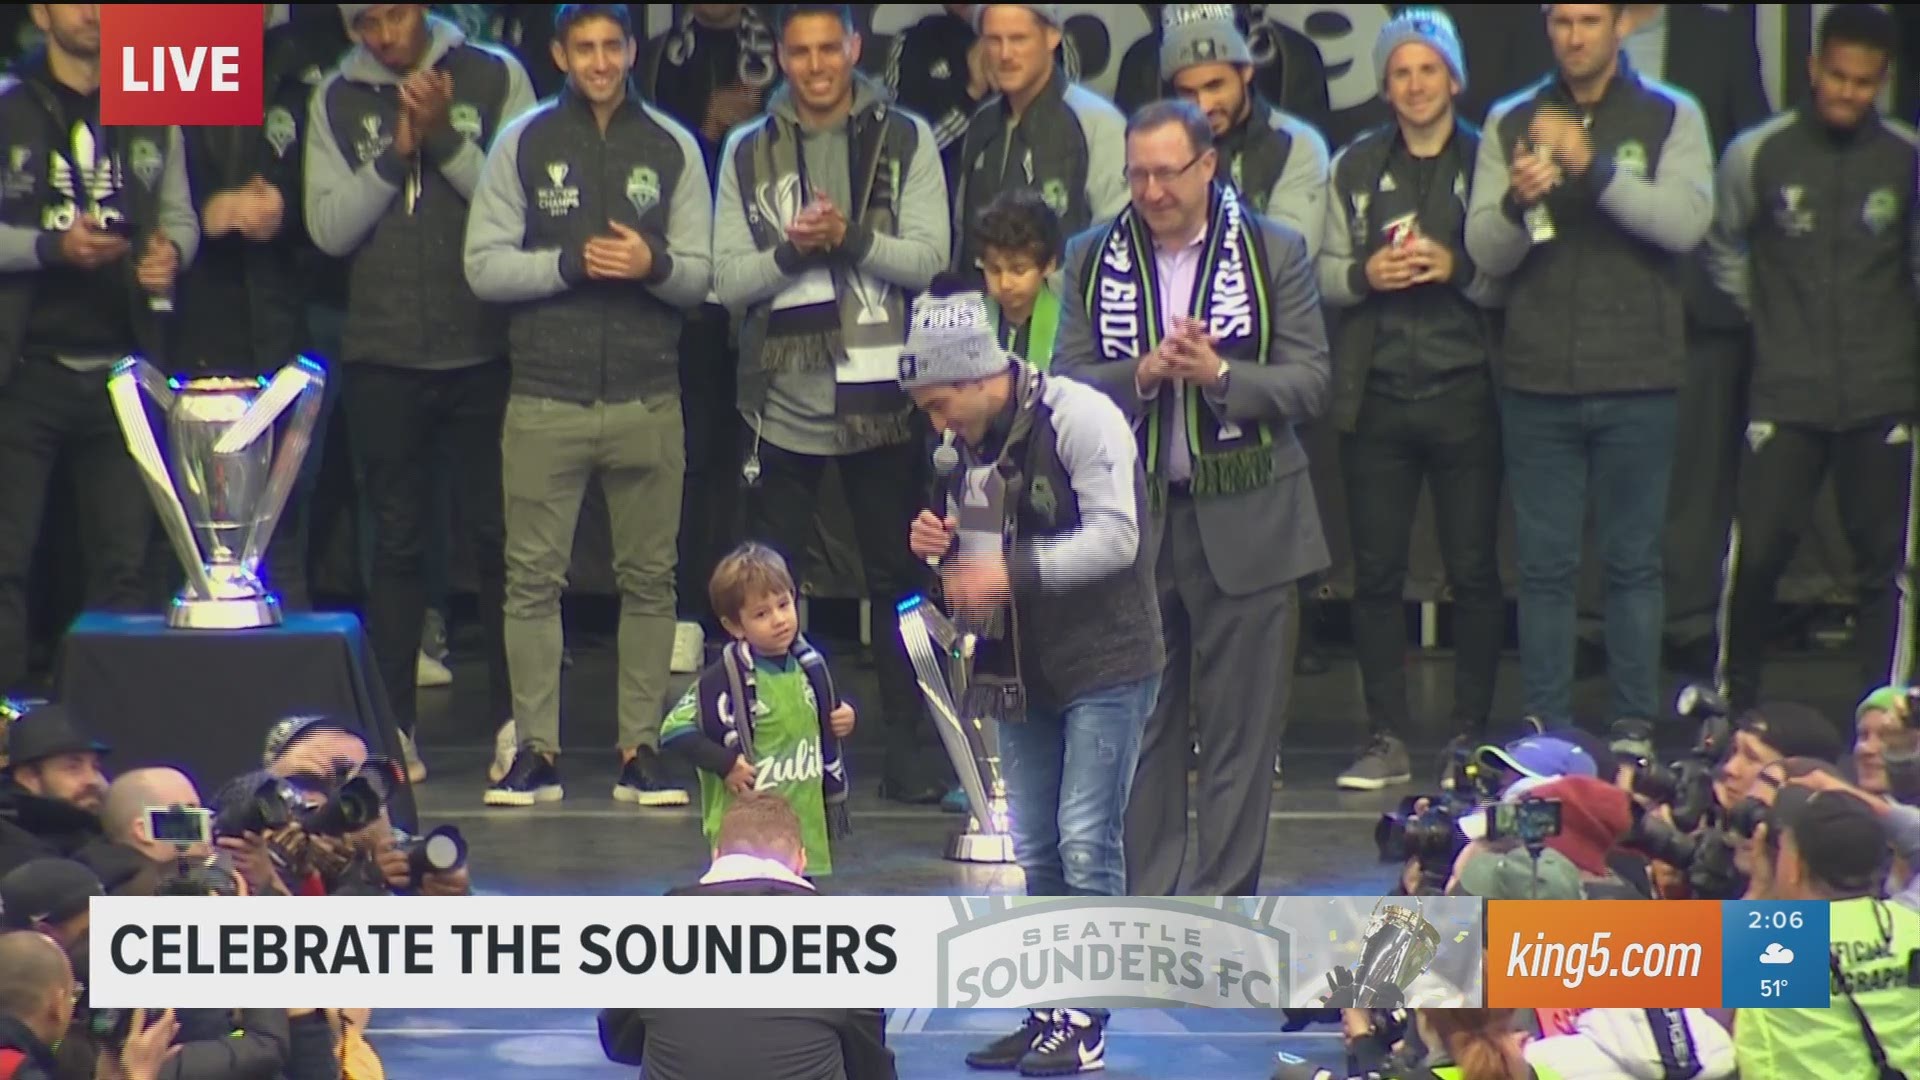 Seattle Sounders team captain Nicolás Lodeiro dances with his son at championship rally. king5.com